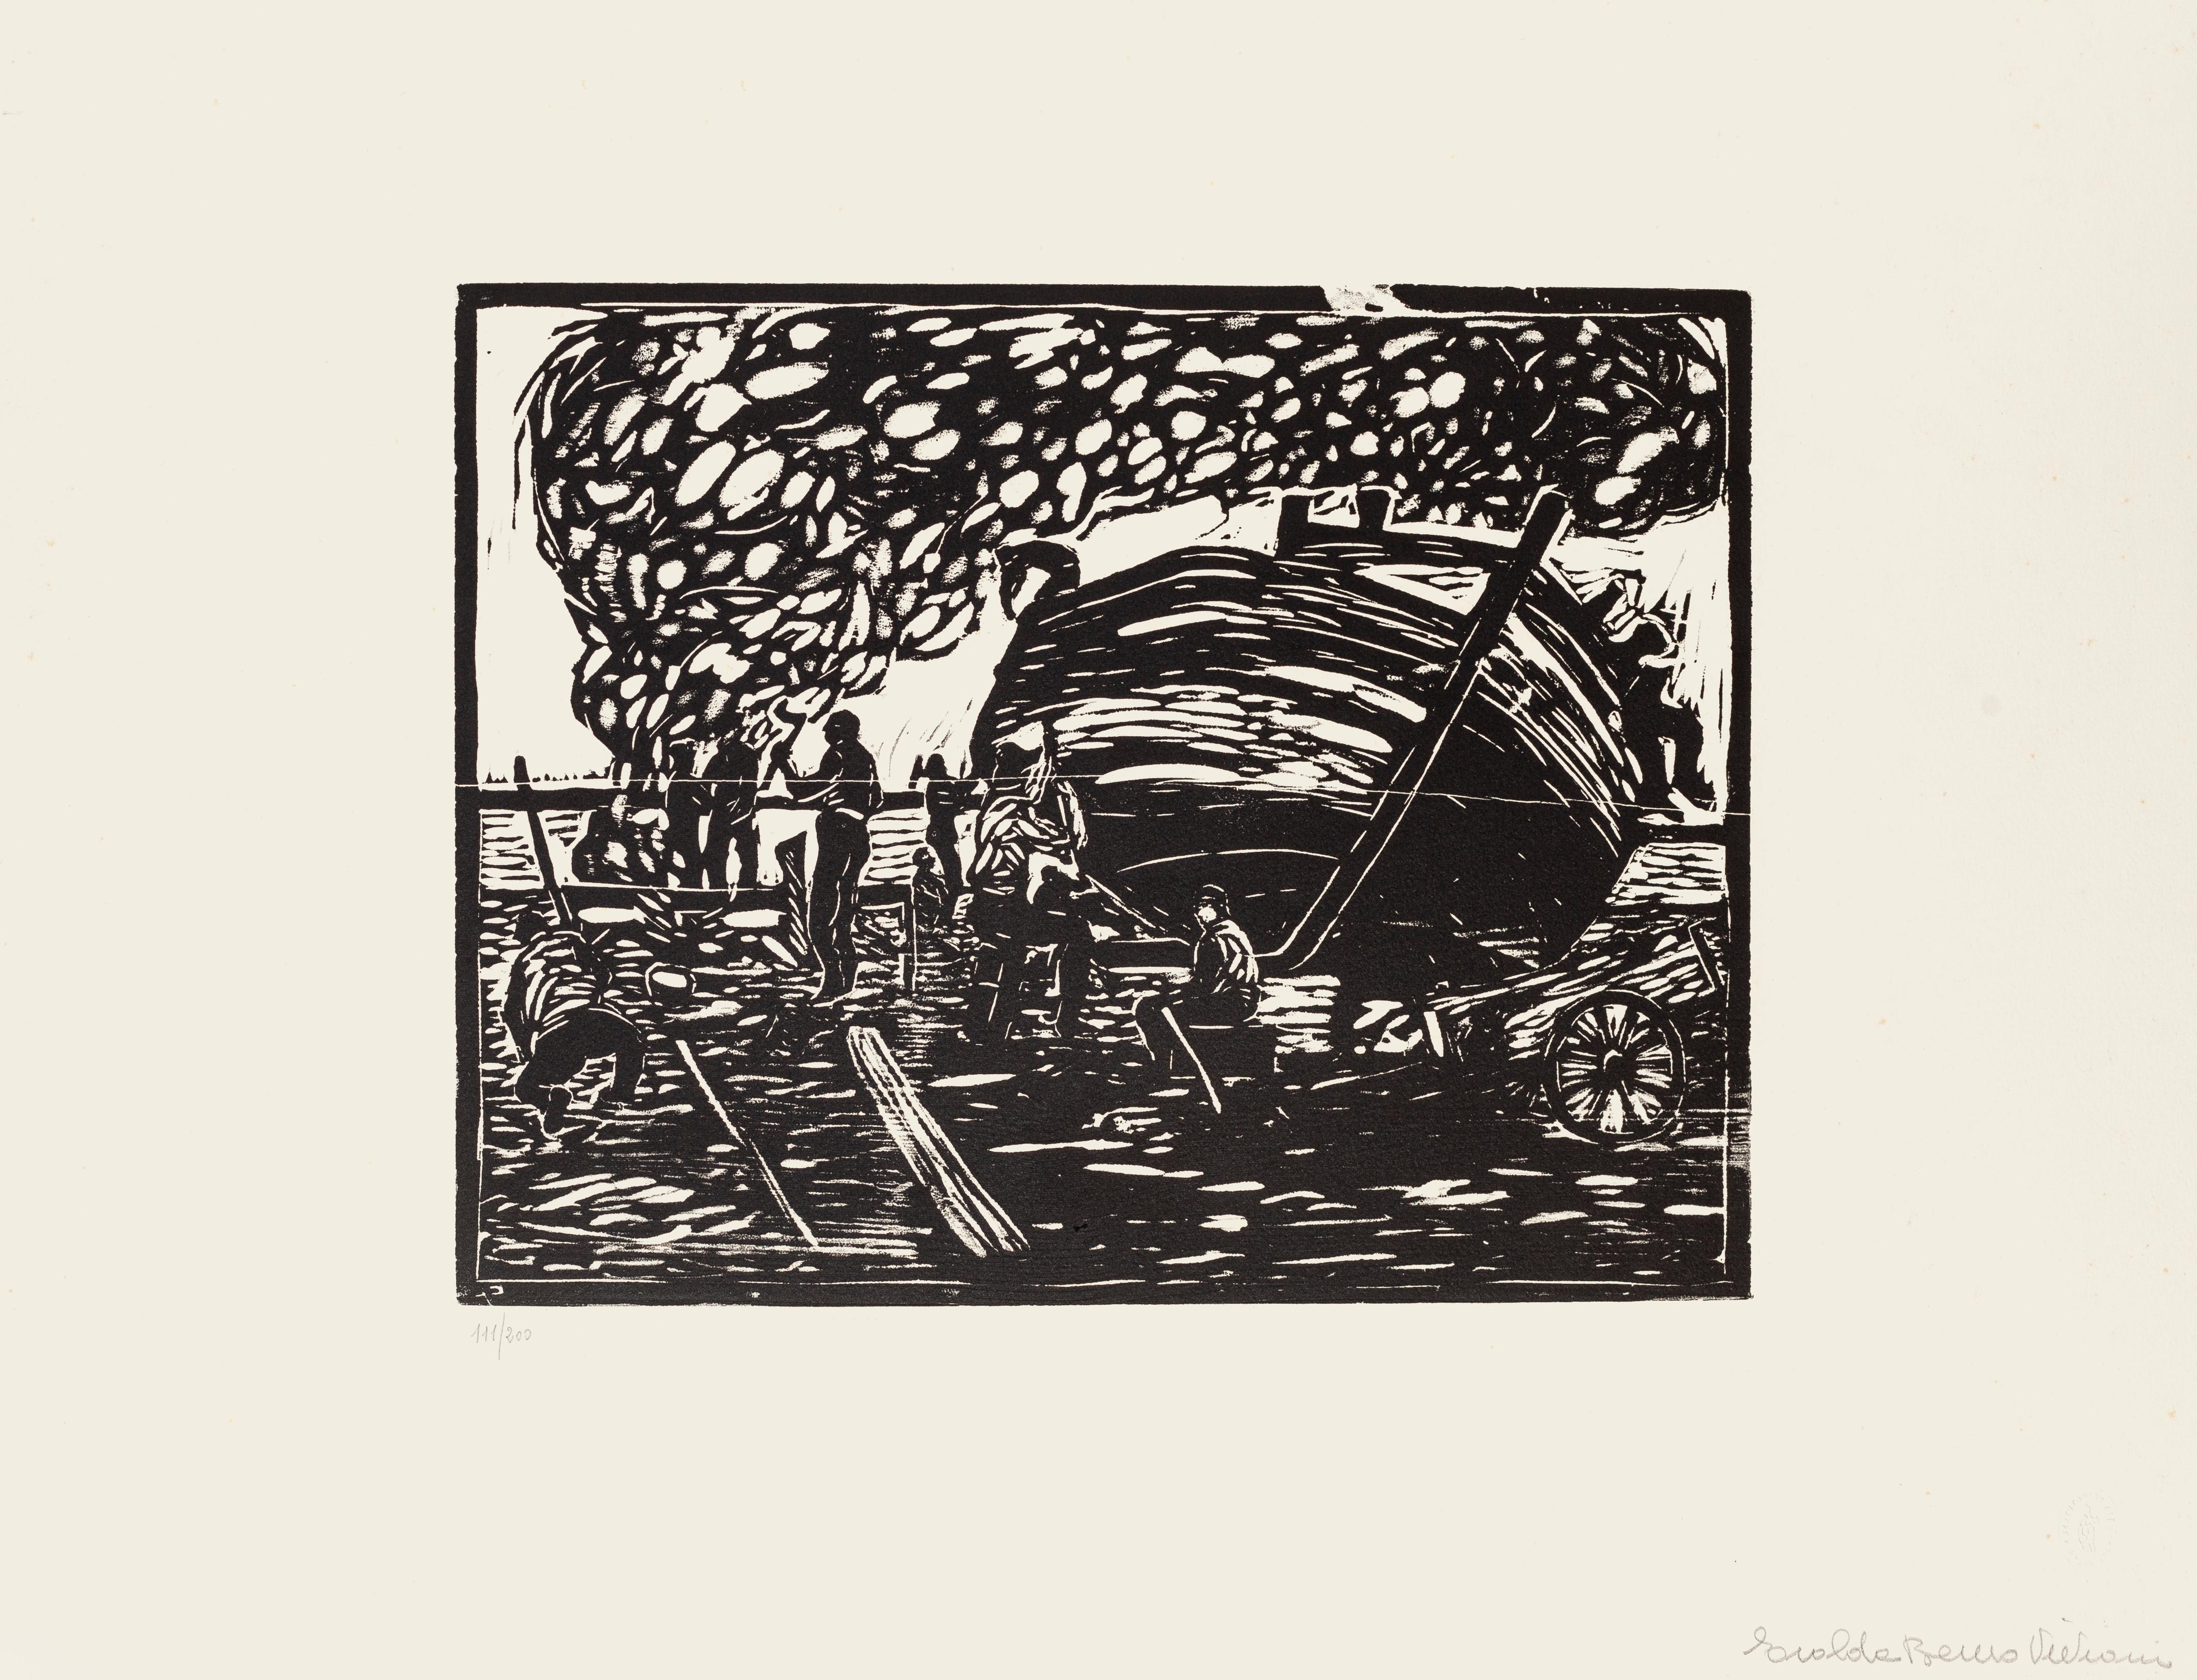 Image dimensions:  30 x 38 cm.

"Workers" is an original xilography realized by Giuseppe Viviani in 1926; Hand-signed in pencil on the lower right, and numbered, edition of 111/200 prints, in pencil on the lower-left. 

Perfect conditions.

The